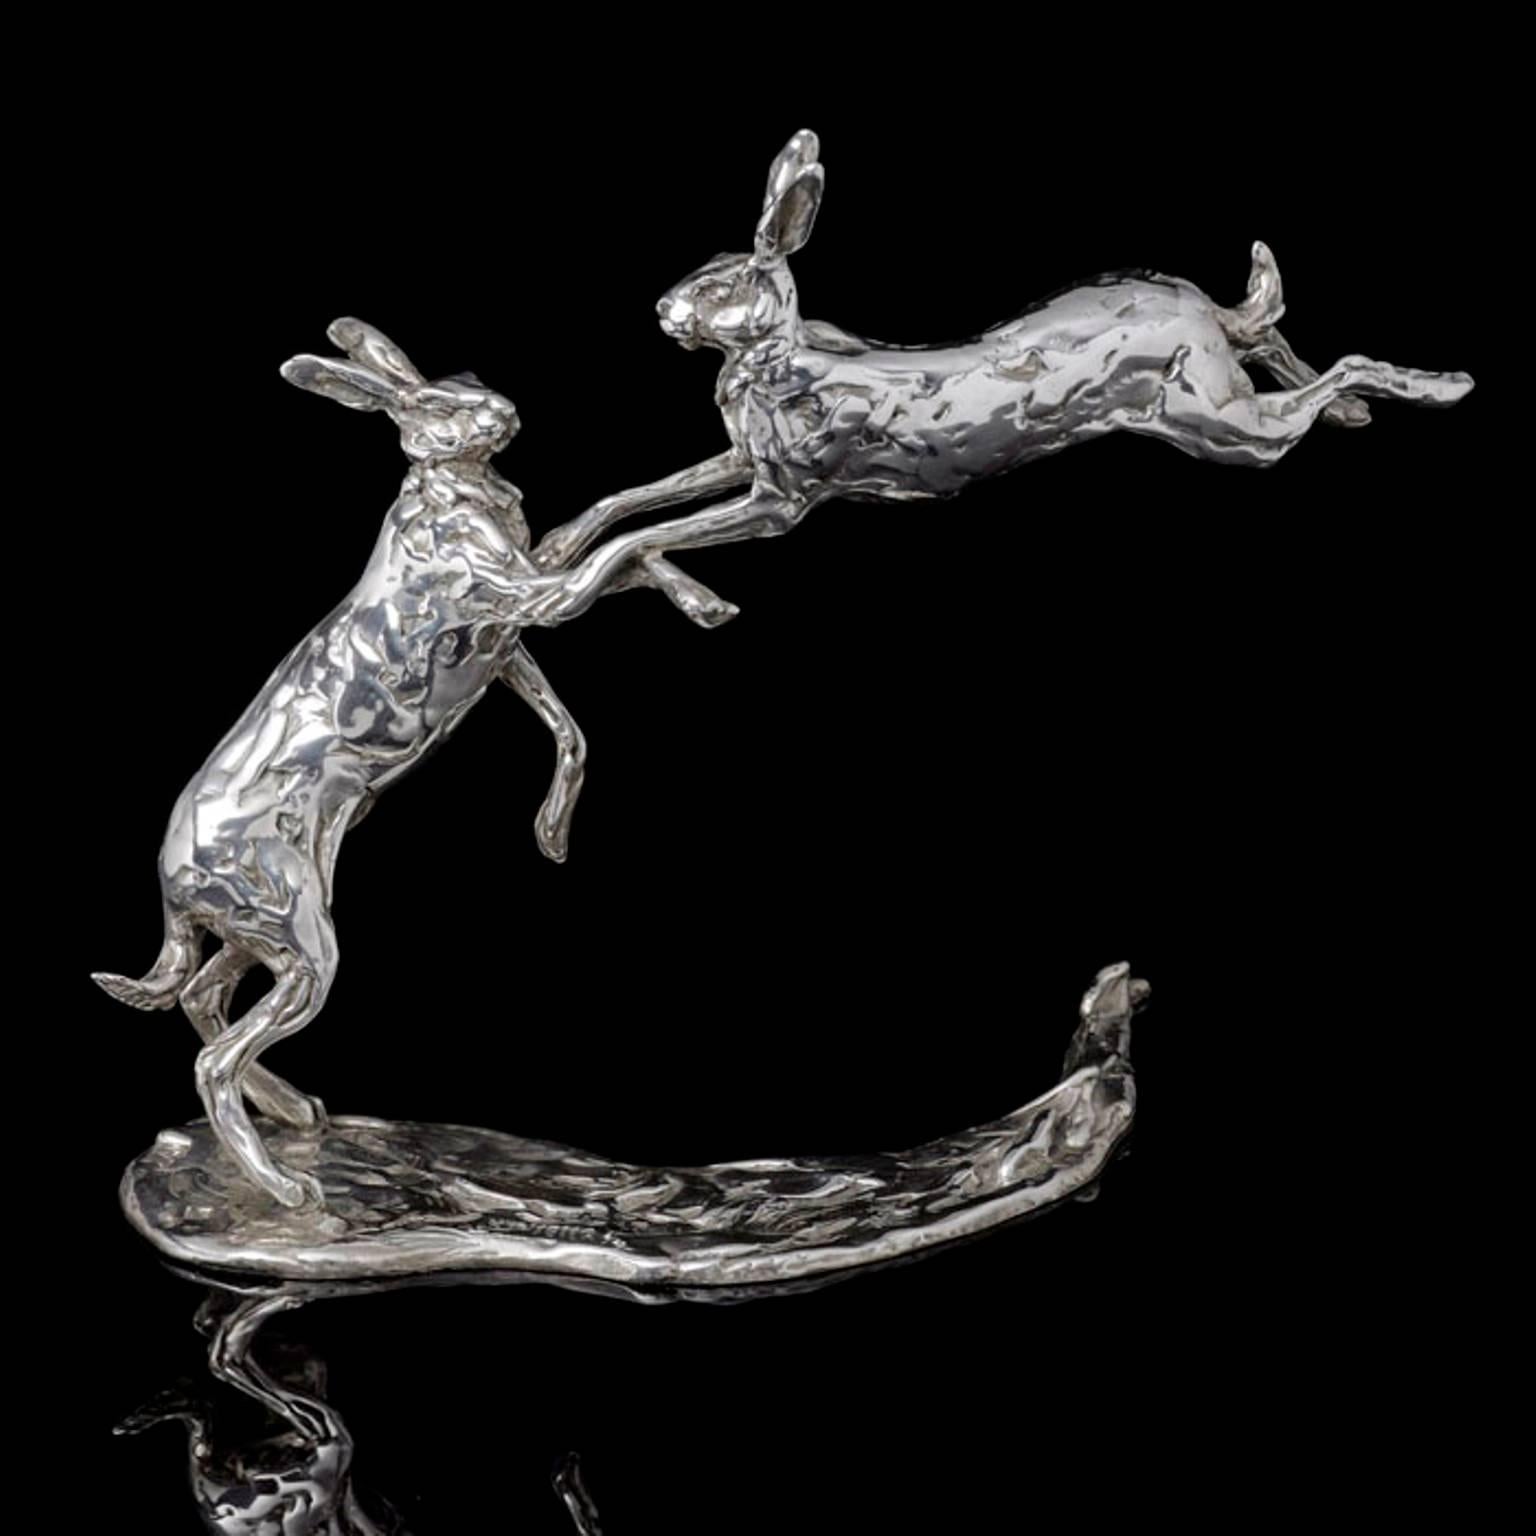 A ‘Leaping Hares’ sterling silver sculpture by Lucy Kinsella, the limited edition finely modelled pair of long eared hares caught mid confrontation with one stood tall on stretched hind legs, the other leaping through the air, front legs